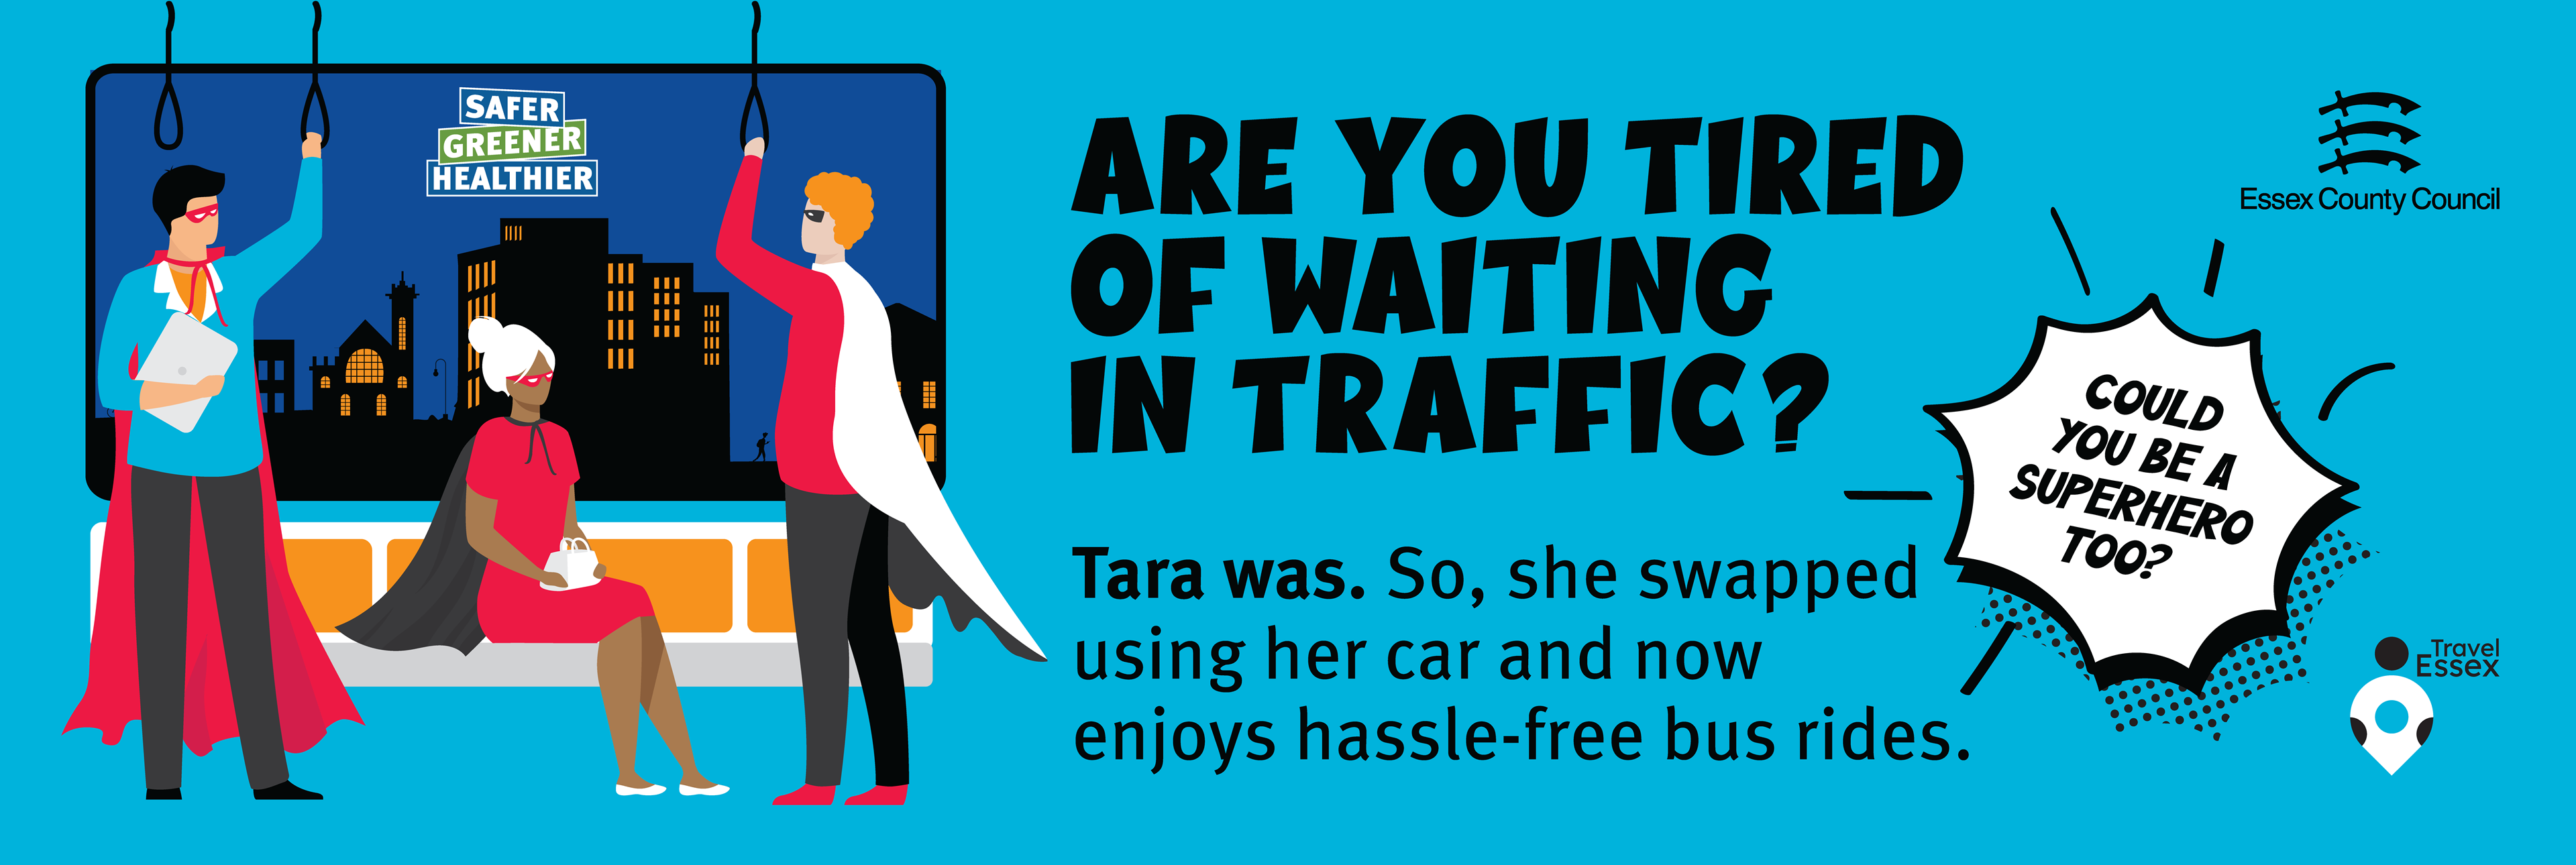 Are you tired of waiting in traffic? Tara was. So, she swapped using her car and now enjoys hassle-free bus rides.